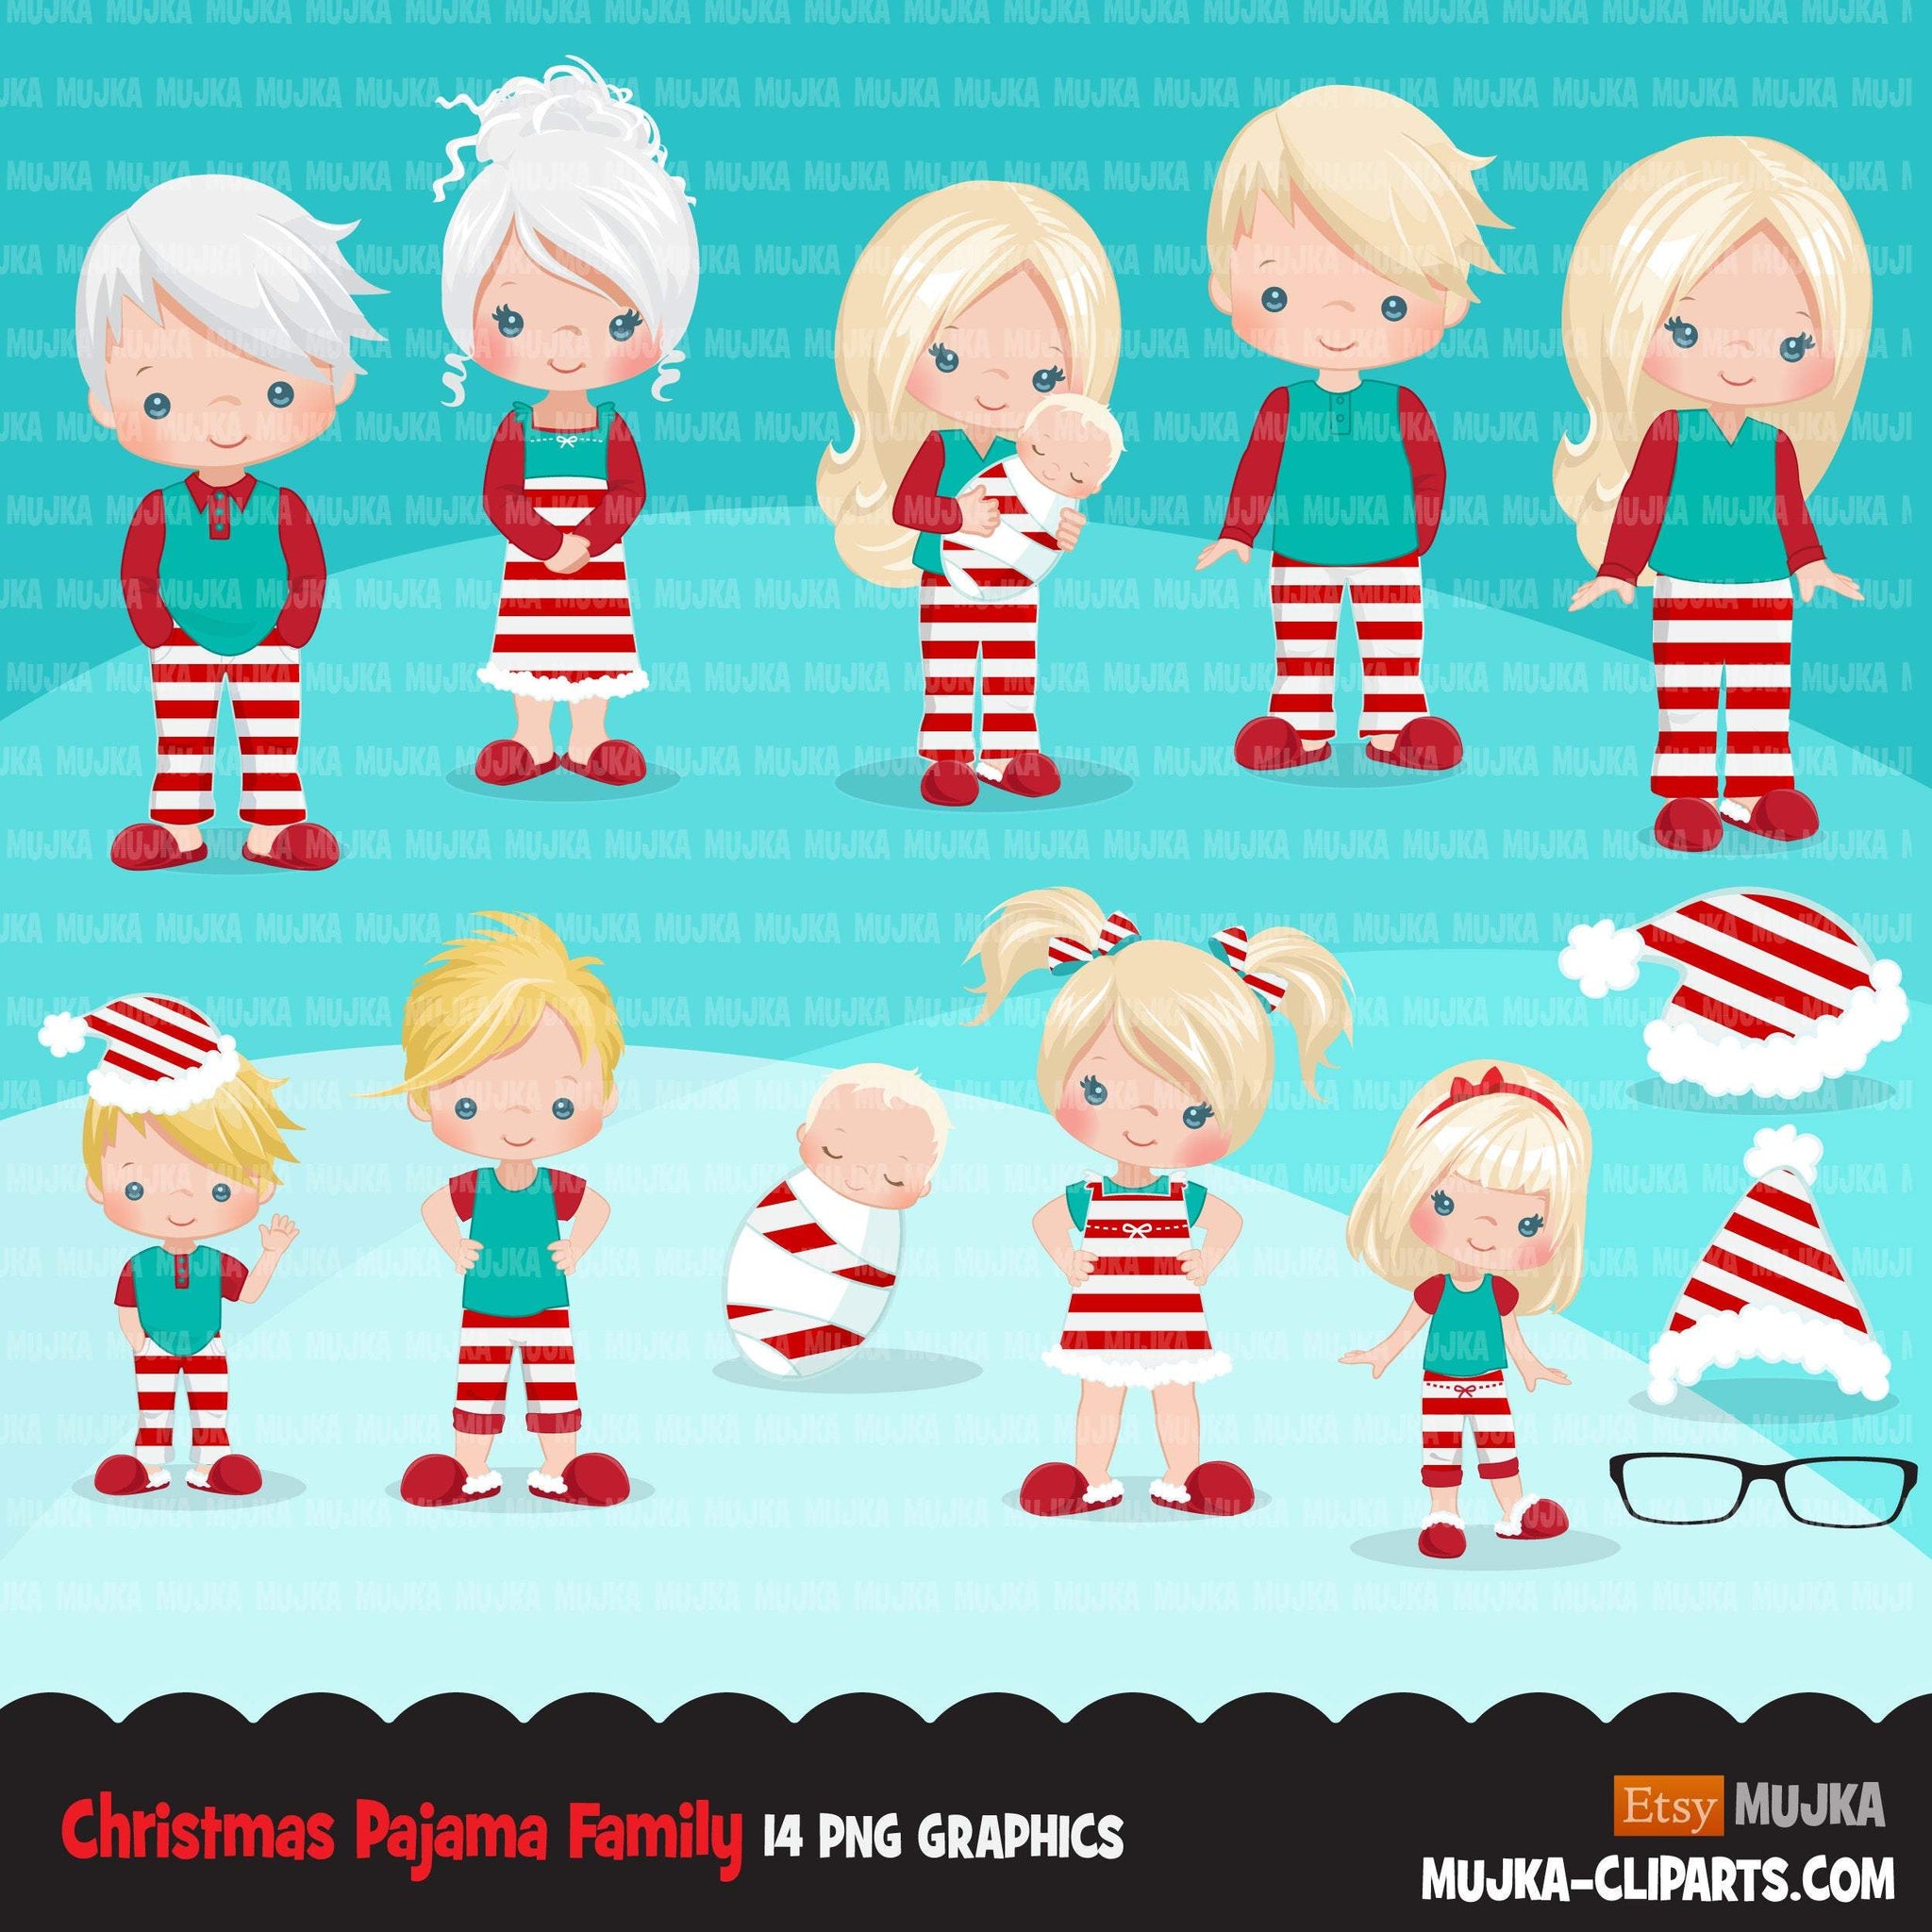 Christmas pajama clipart bundle, Noel Illustrations, pajama family, commercial use graphics, make your own family, Png sublimation clip art